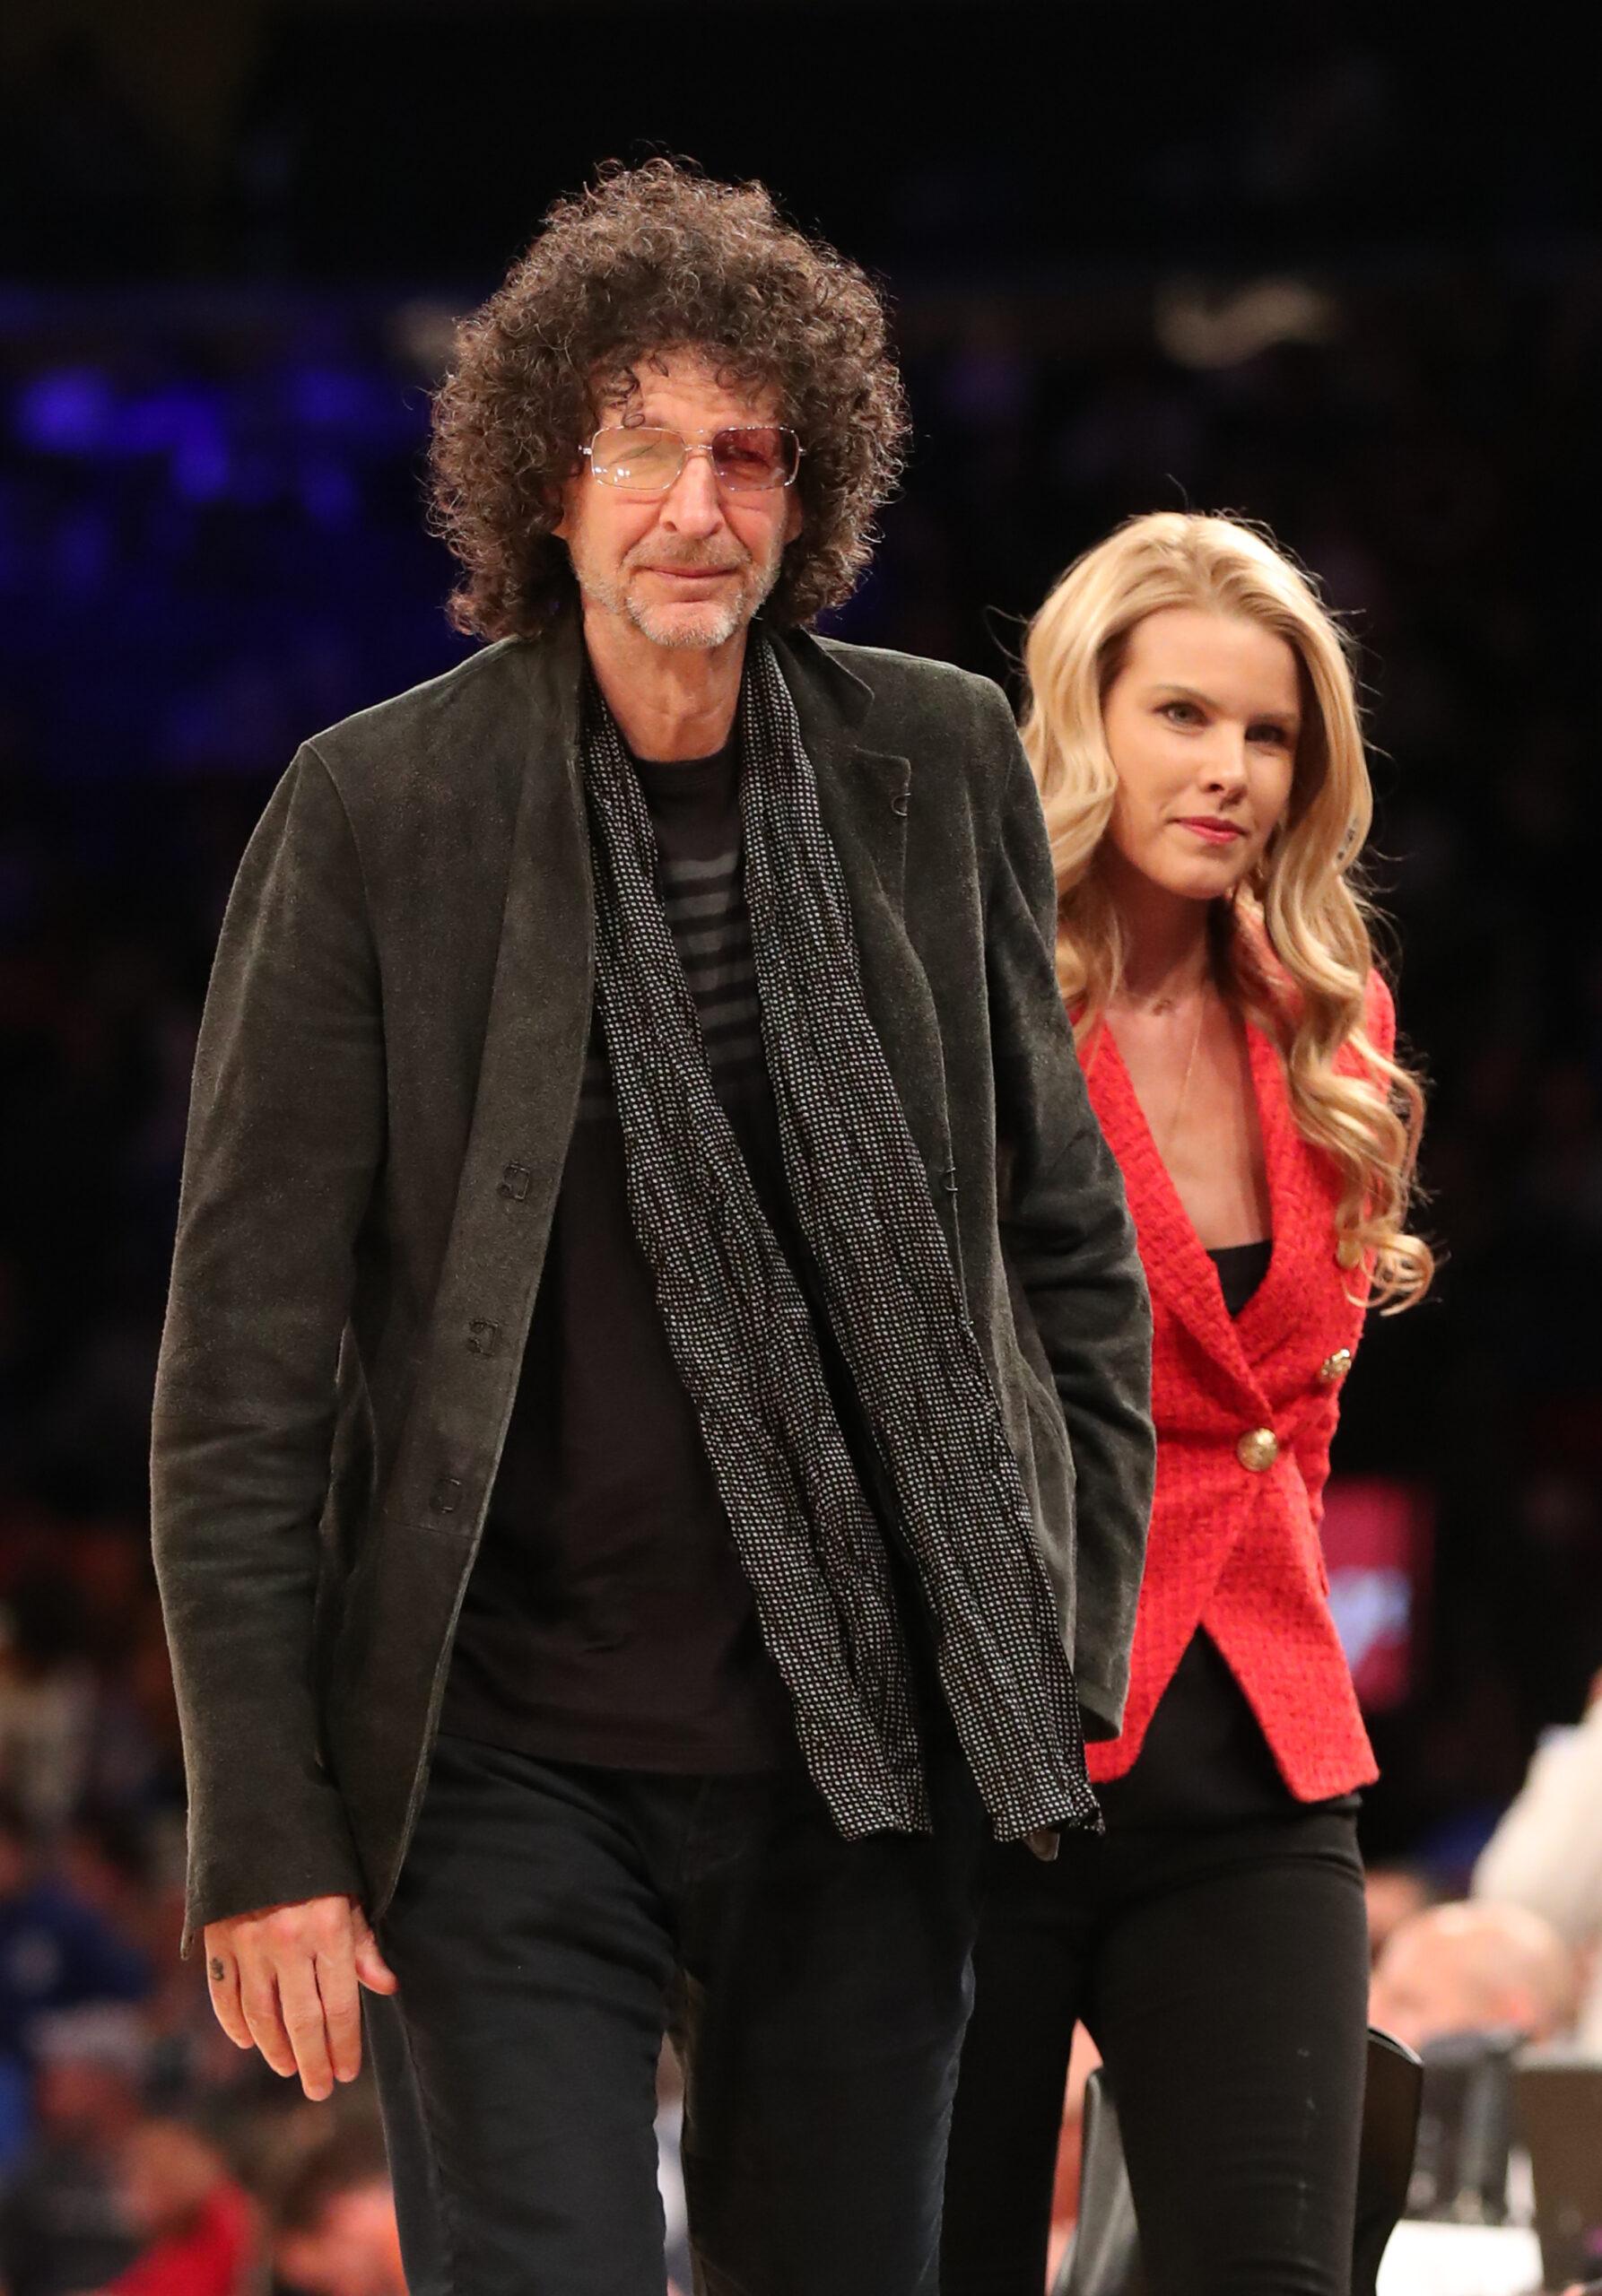 Celebs at the New York Knicks game